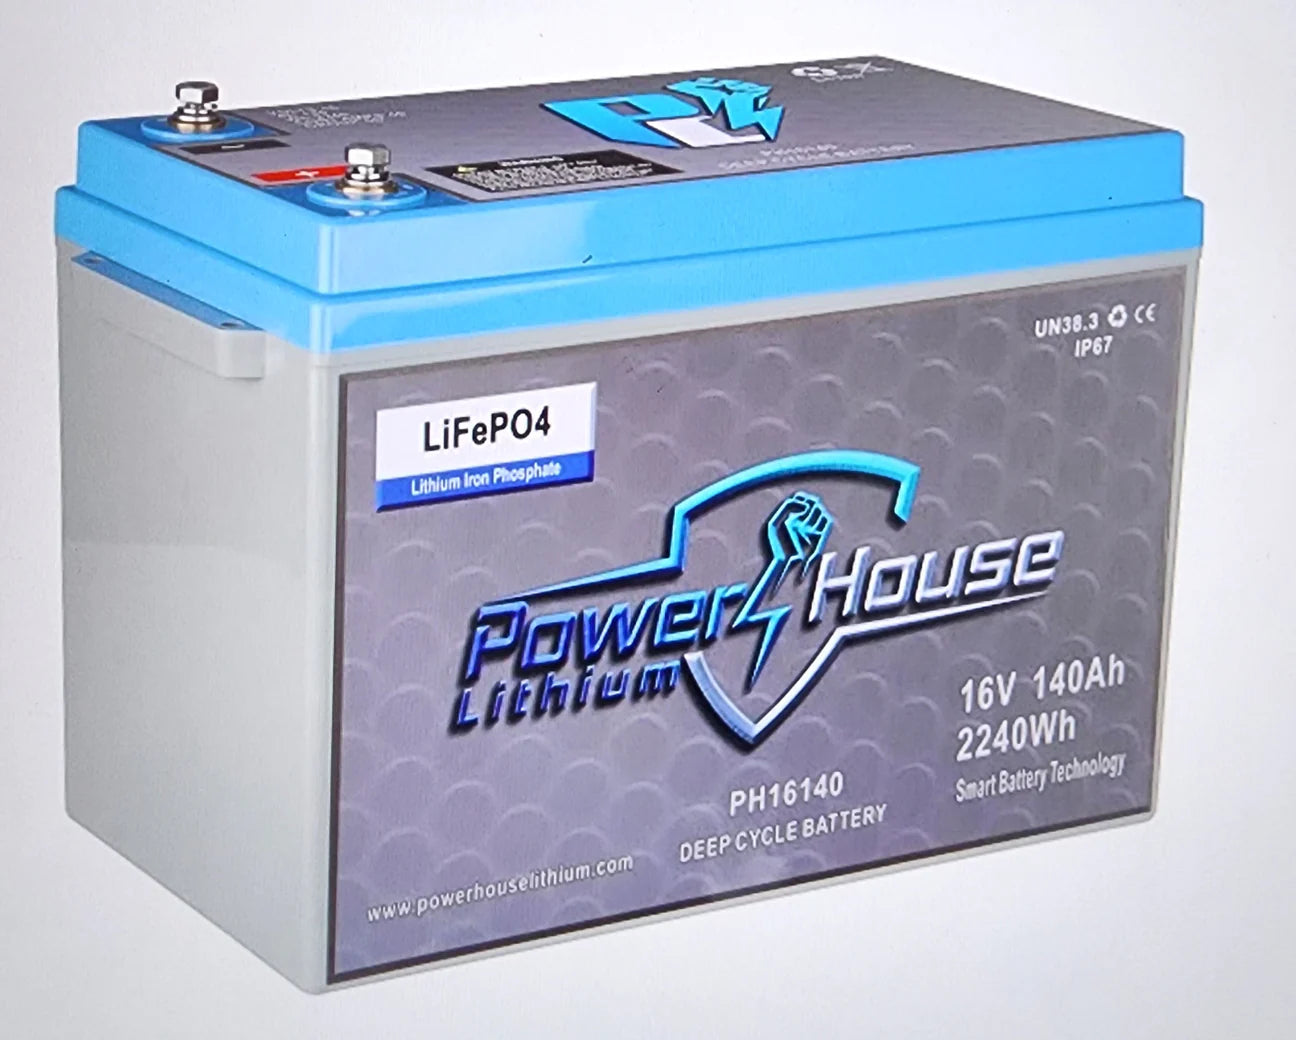 16V 140AH DEEP CYCLE BATTERY (5 TO 8 DEVICES)